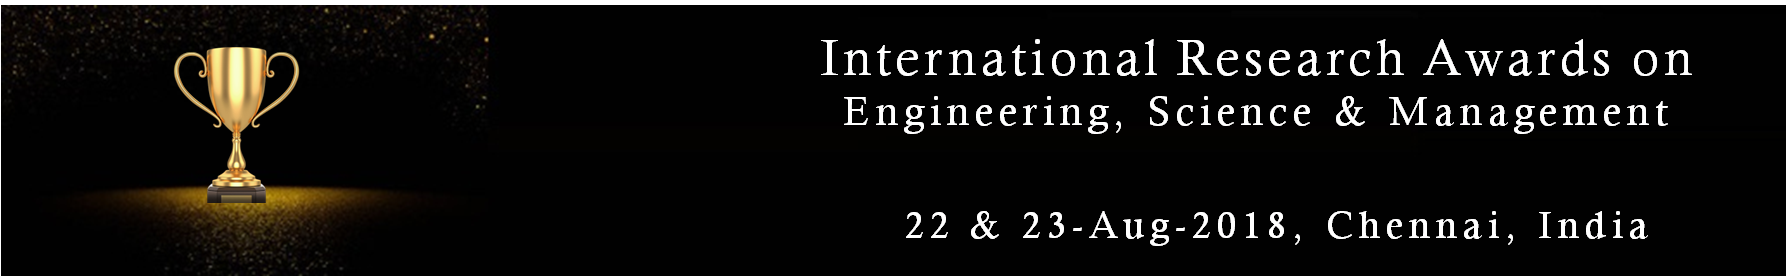 International Research Awards in Engineering, Science and Management, Chennai, Tamil Nadu, India